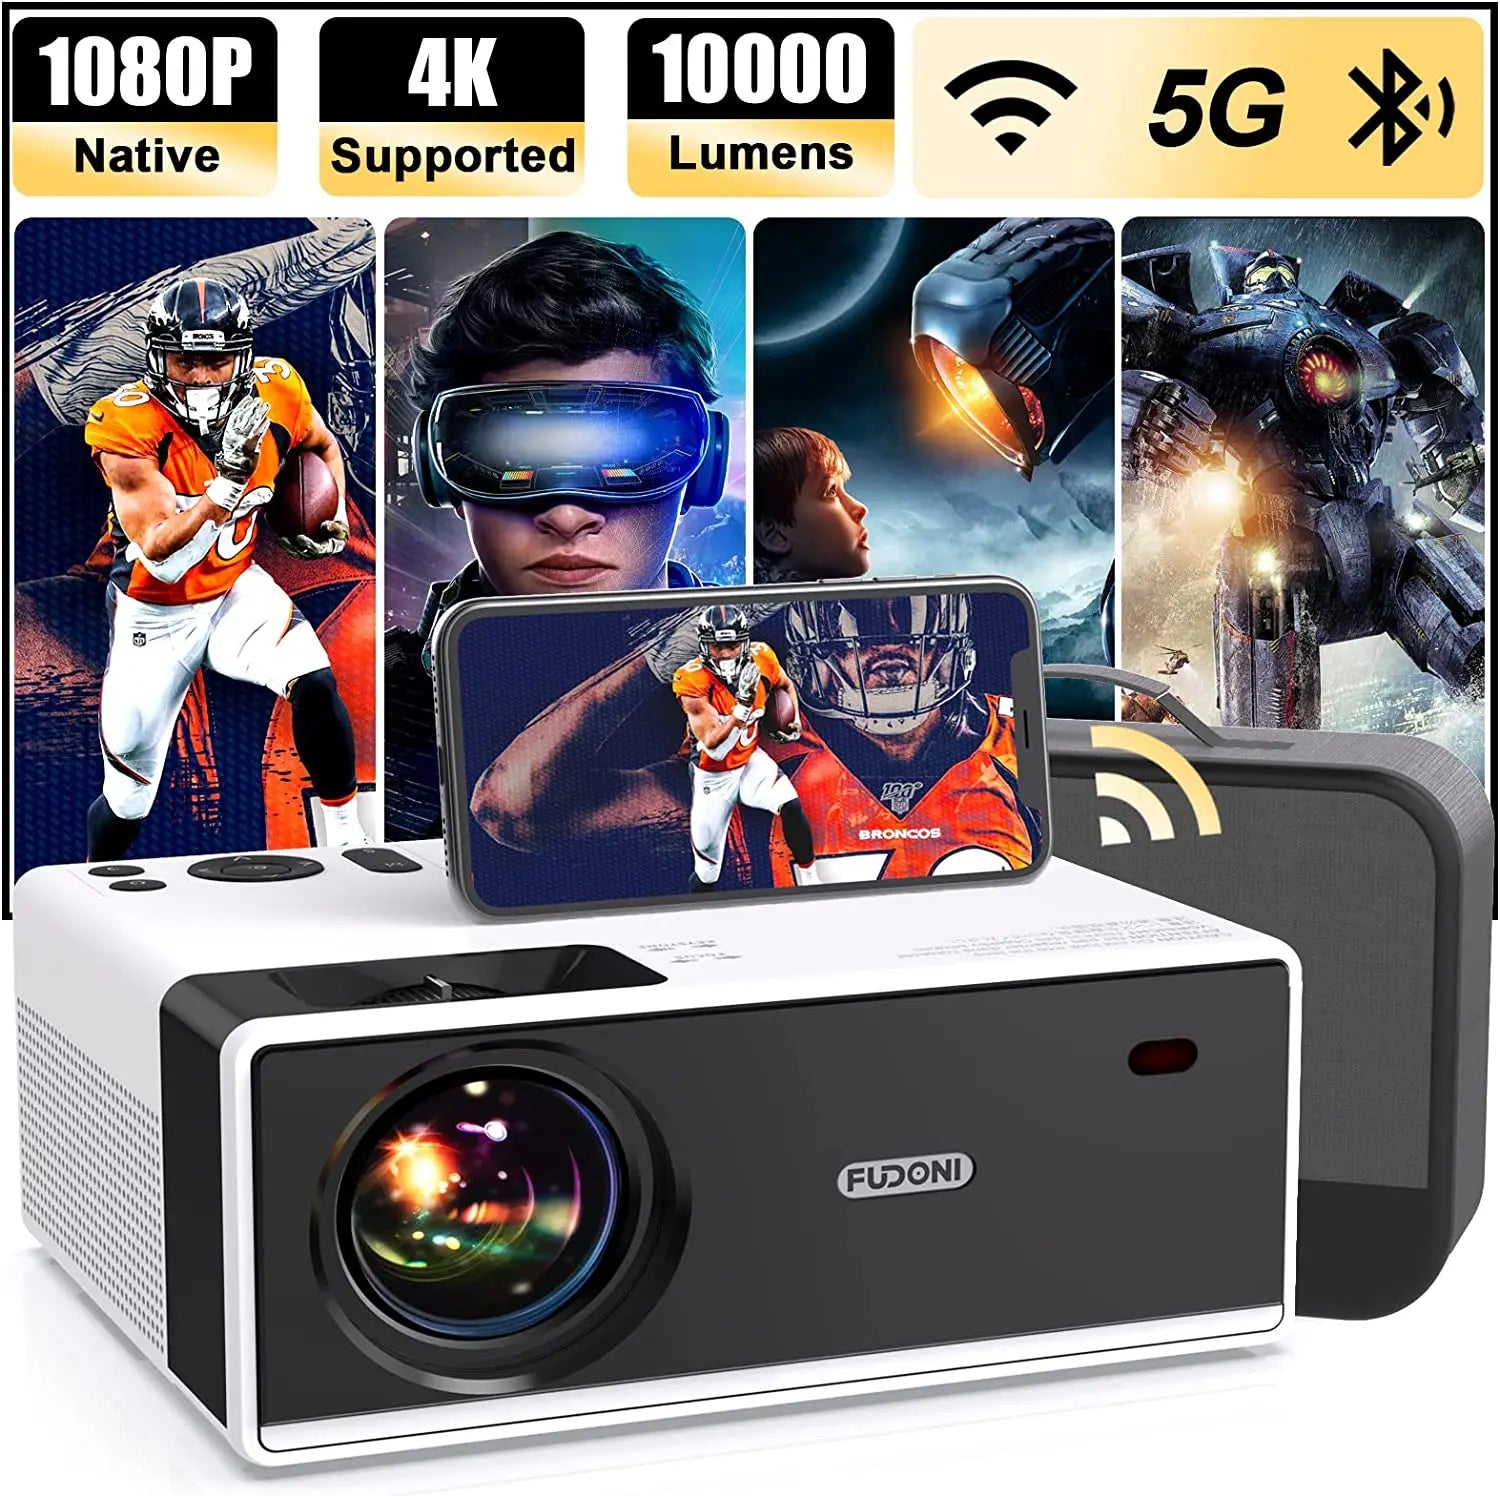 Hd Proyector 4k Home Theater Video Projector Portable Mini Projector Ac  100240v